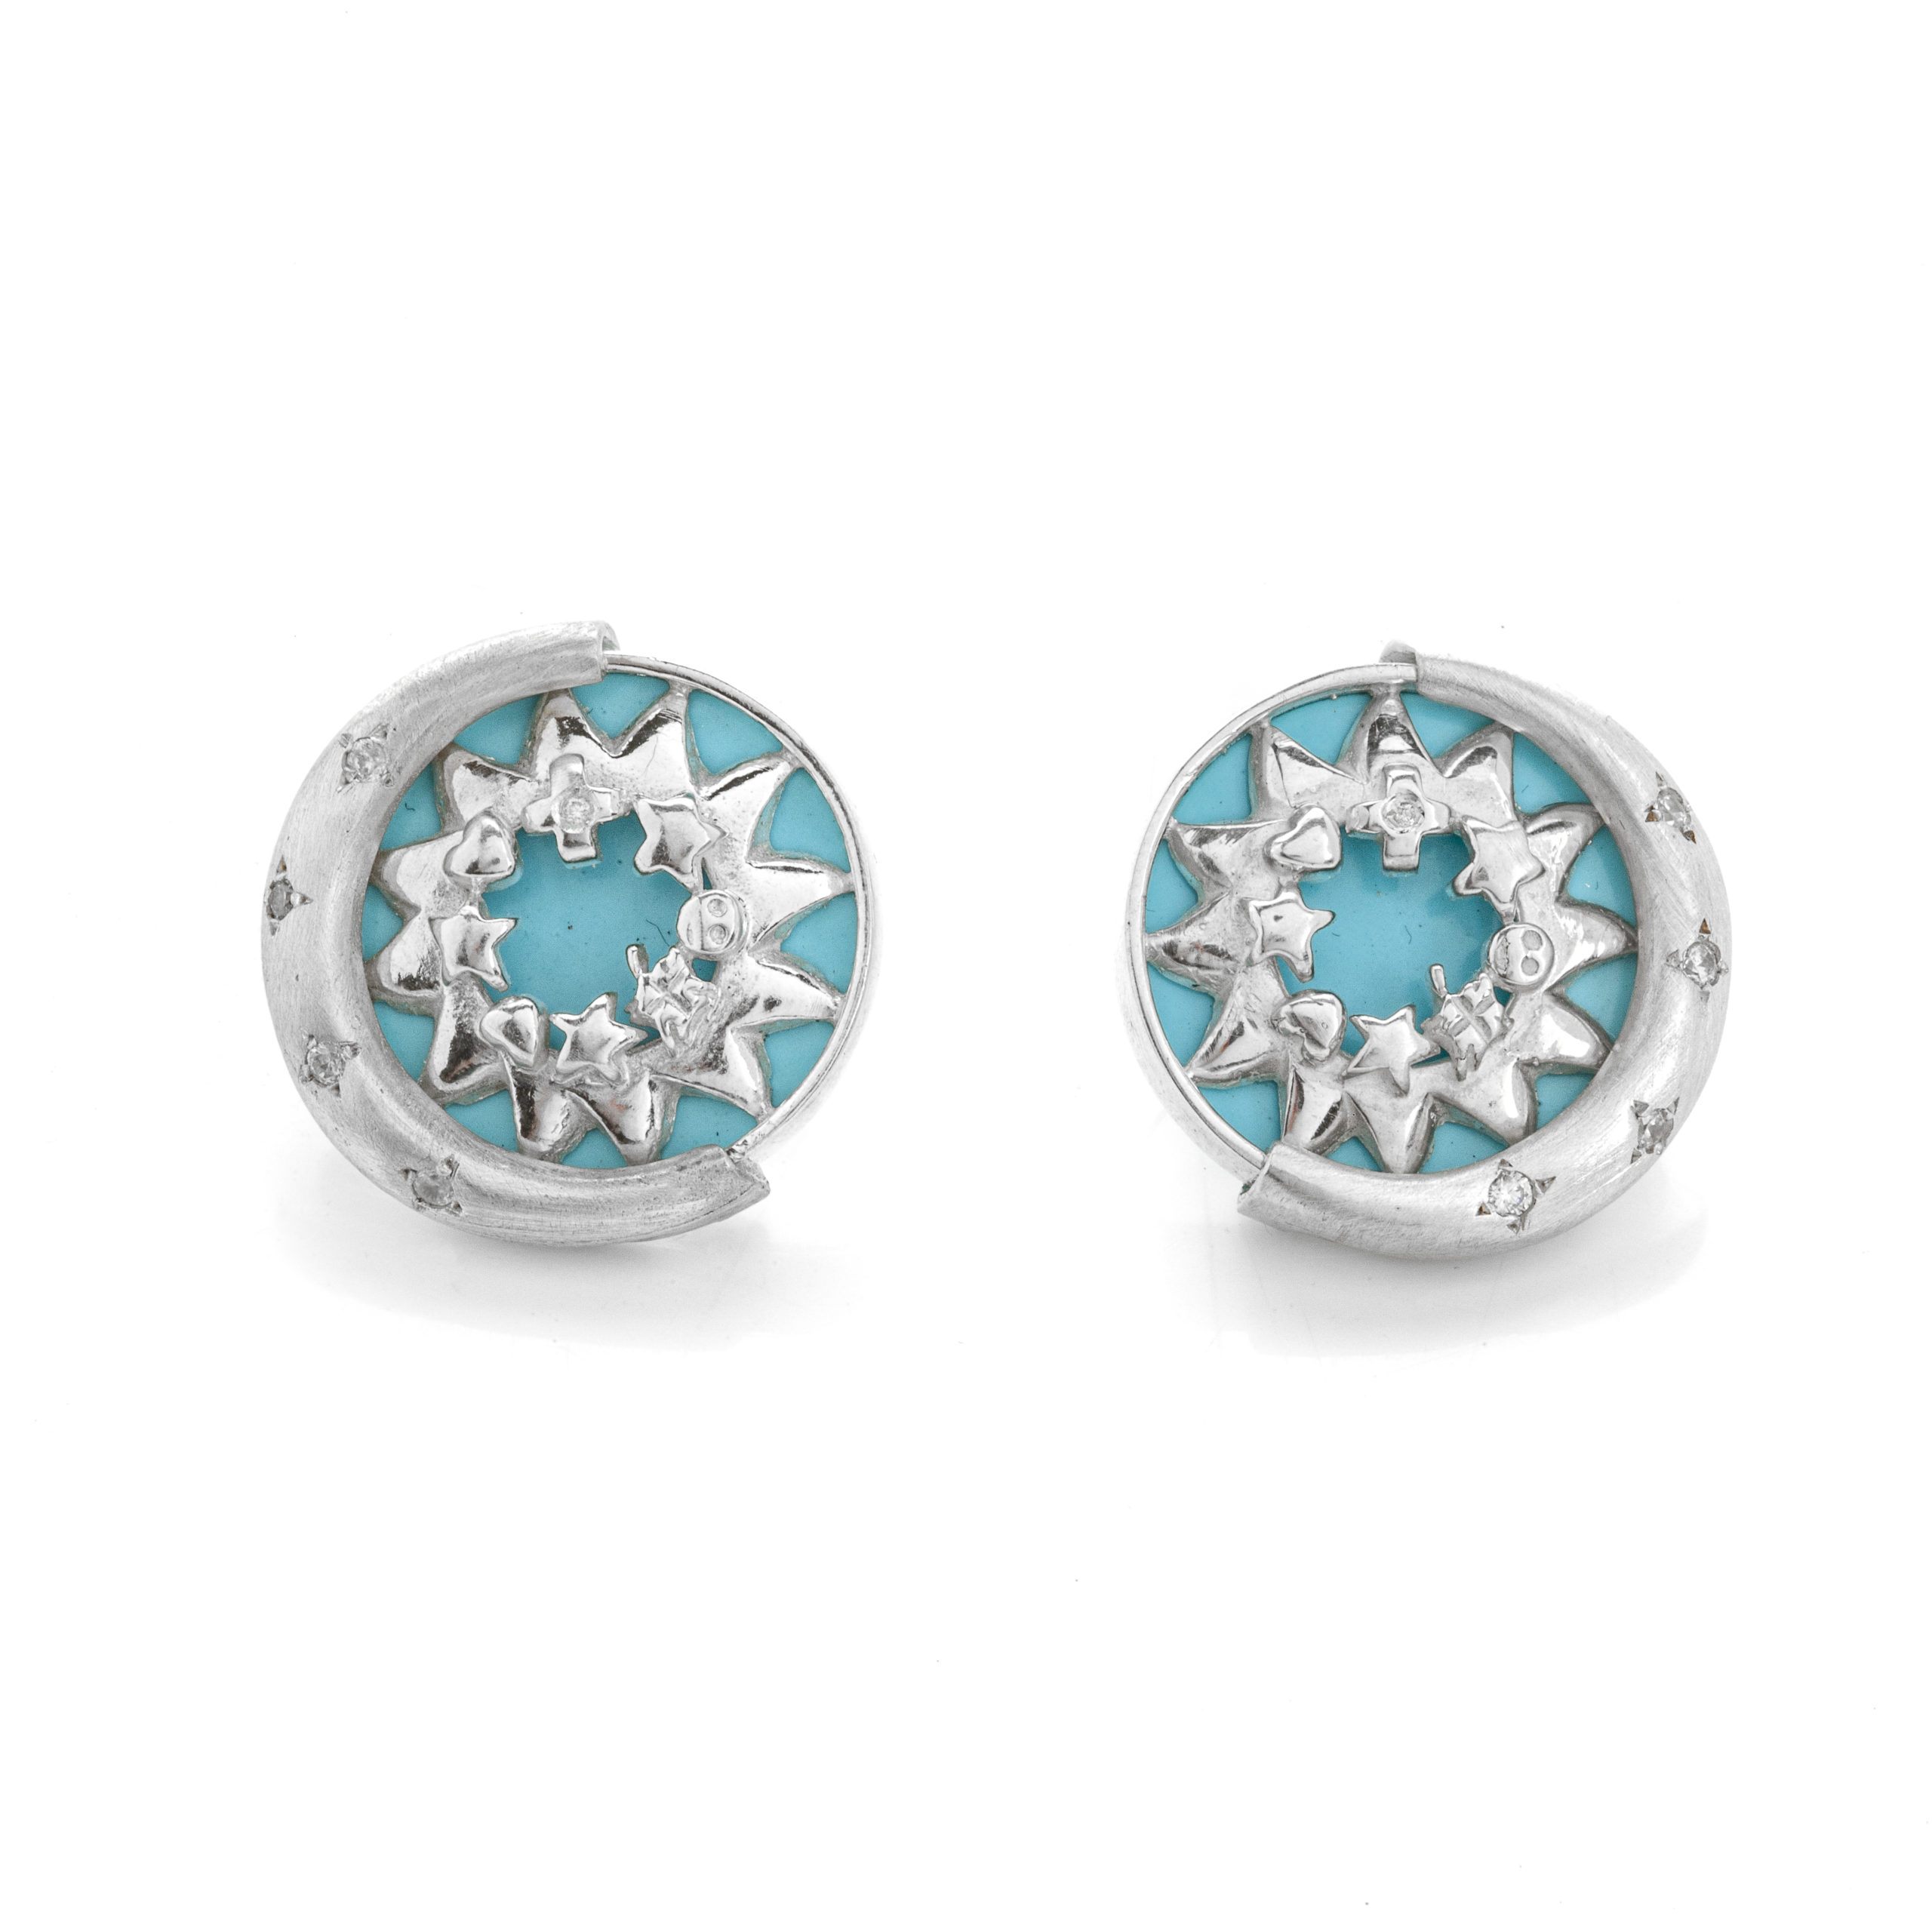 Summer Edition Eclipse 2023-Silver Earrings with Turquoise